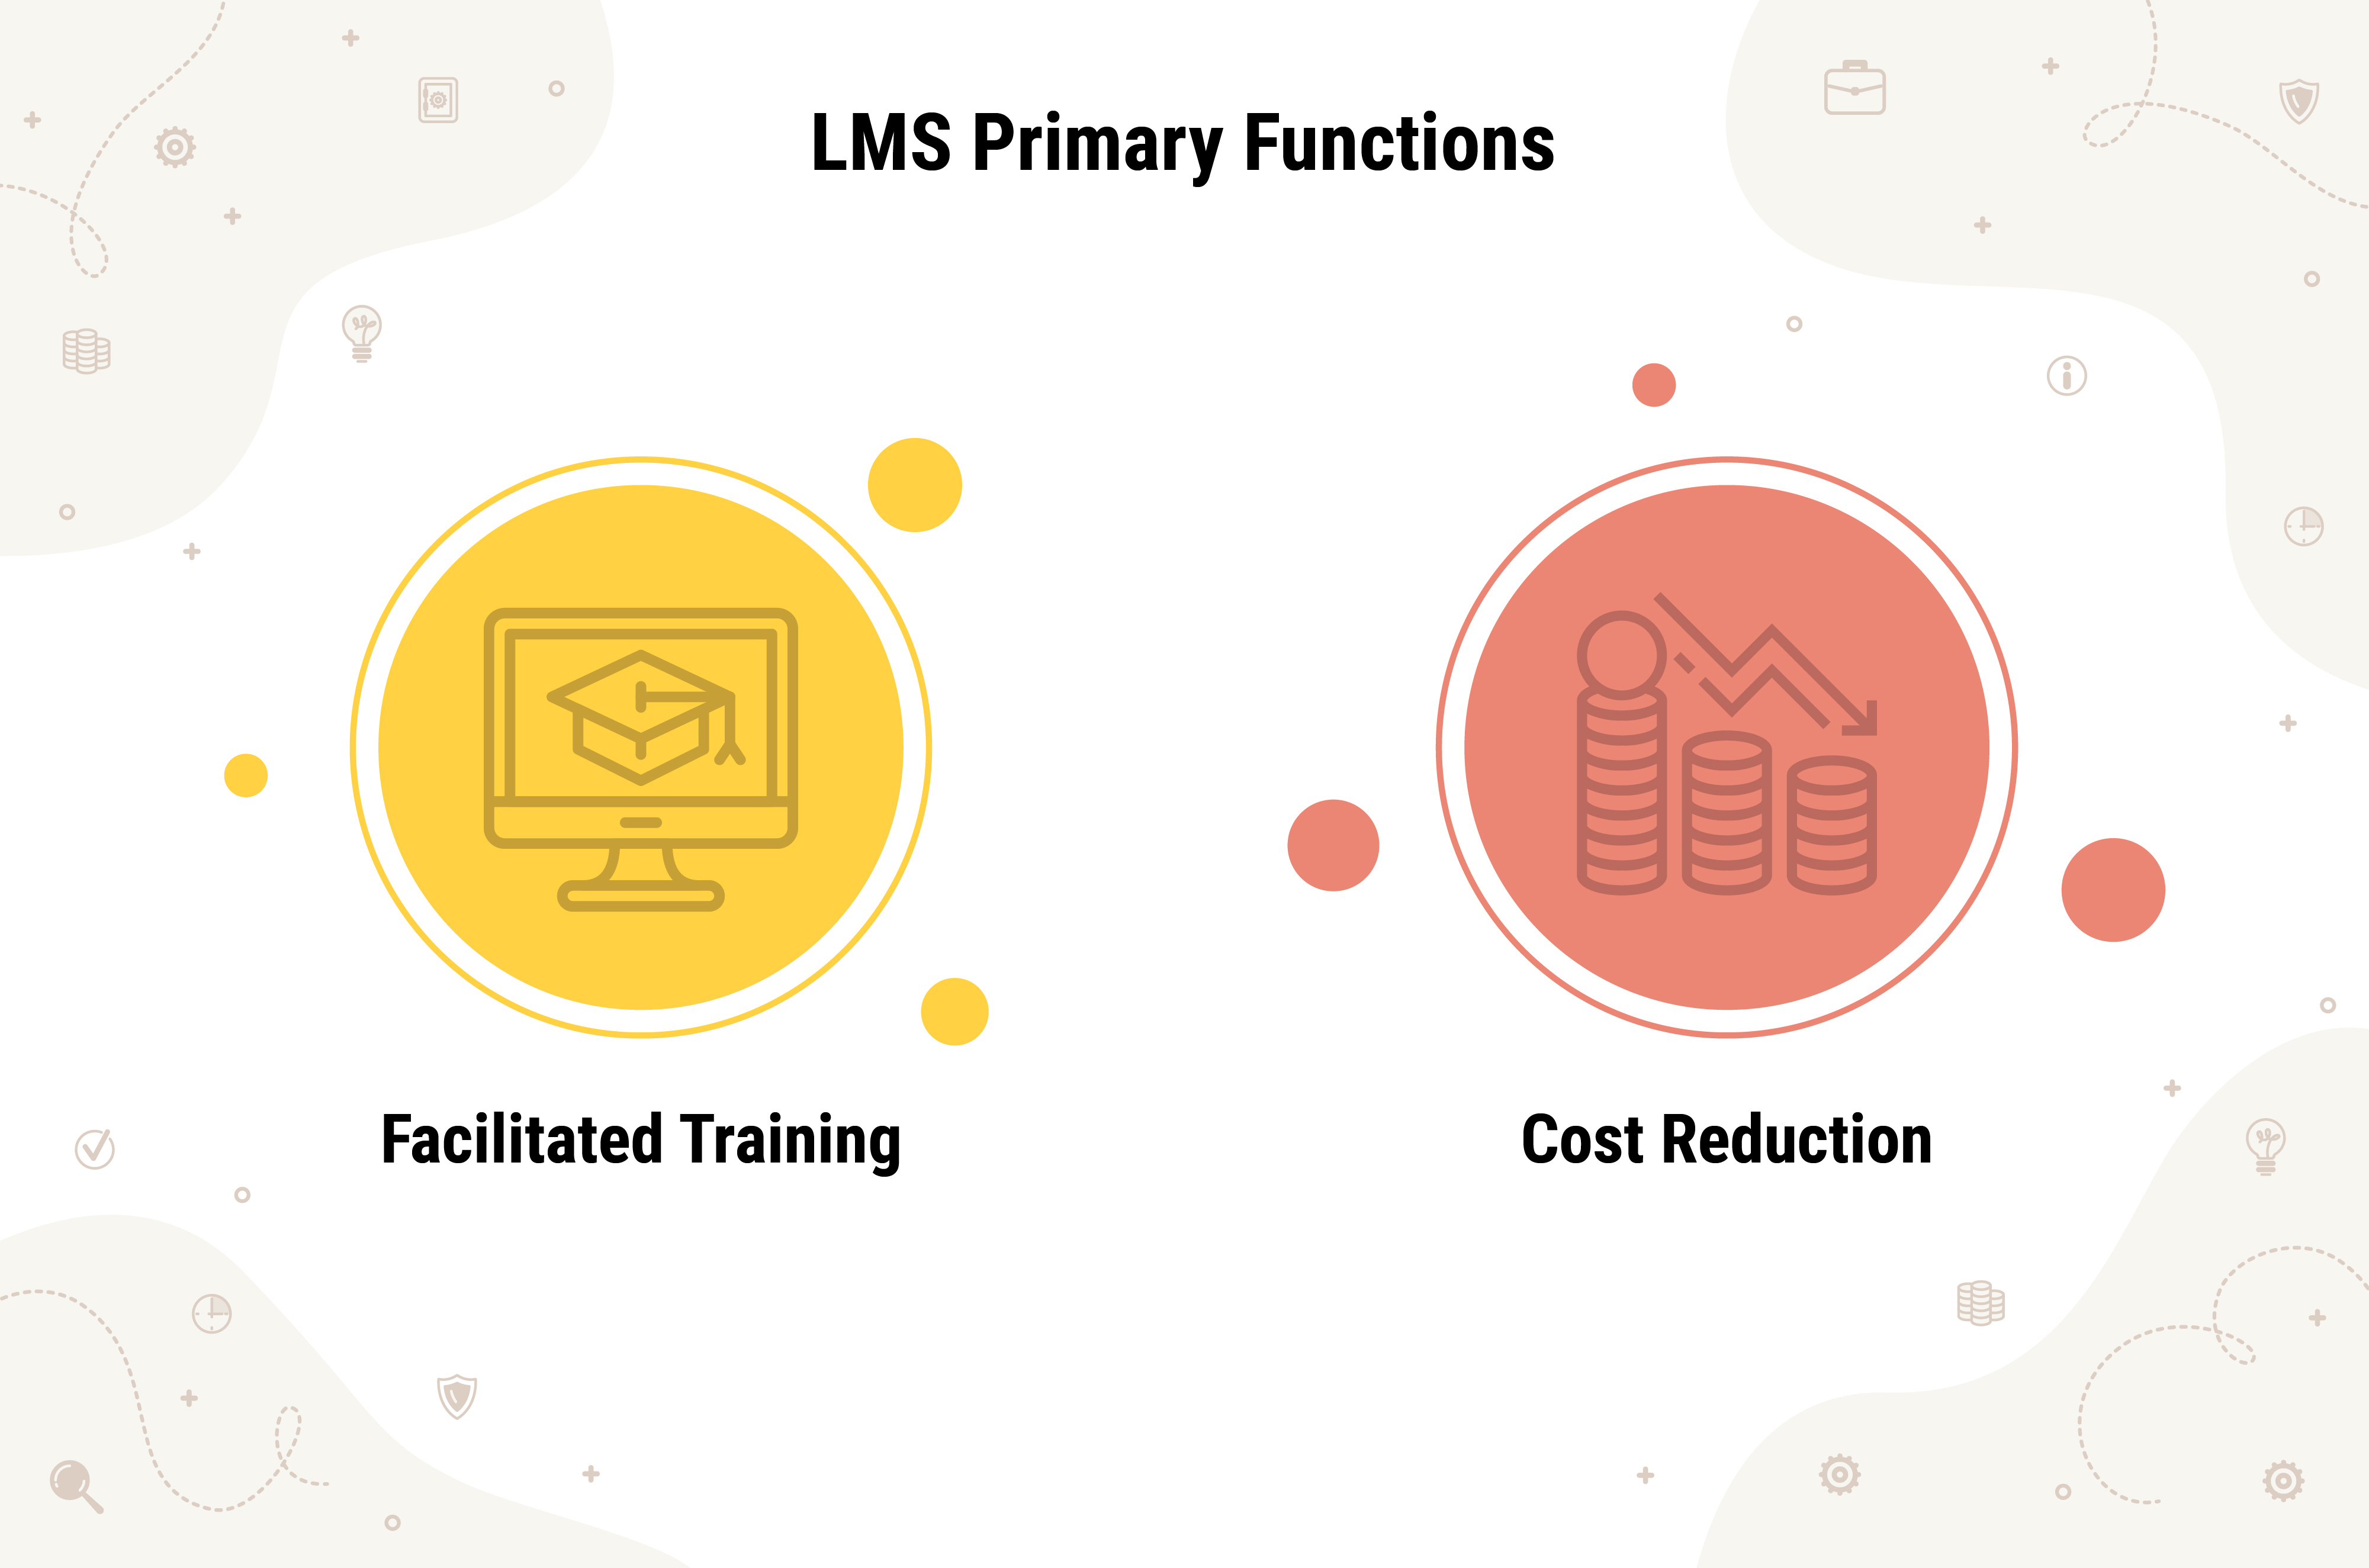 Main functions of LMS